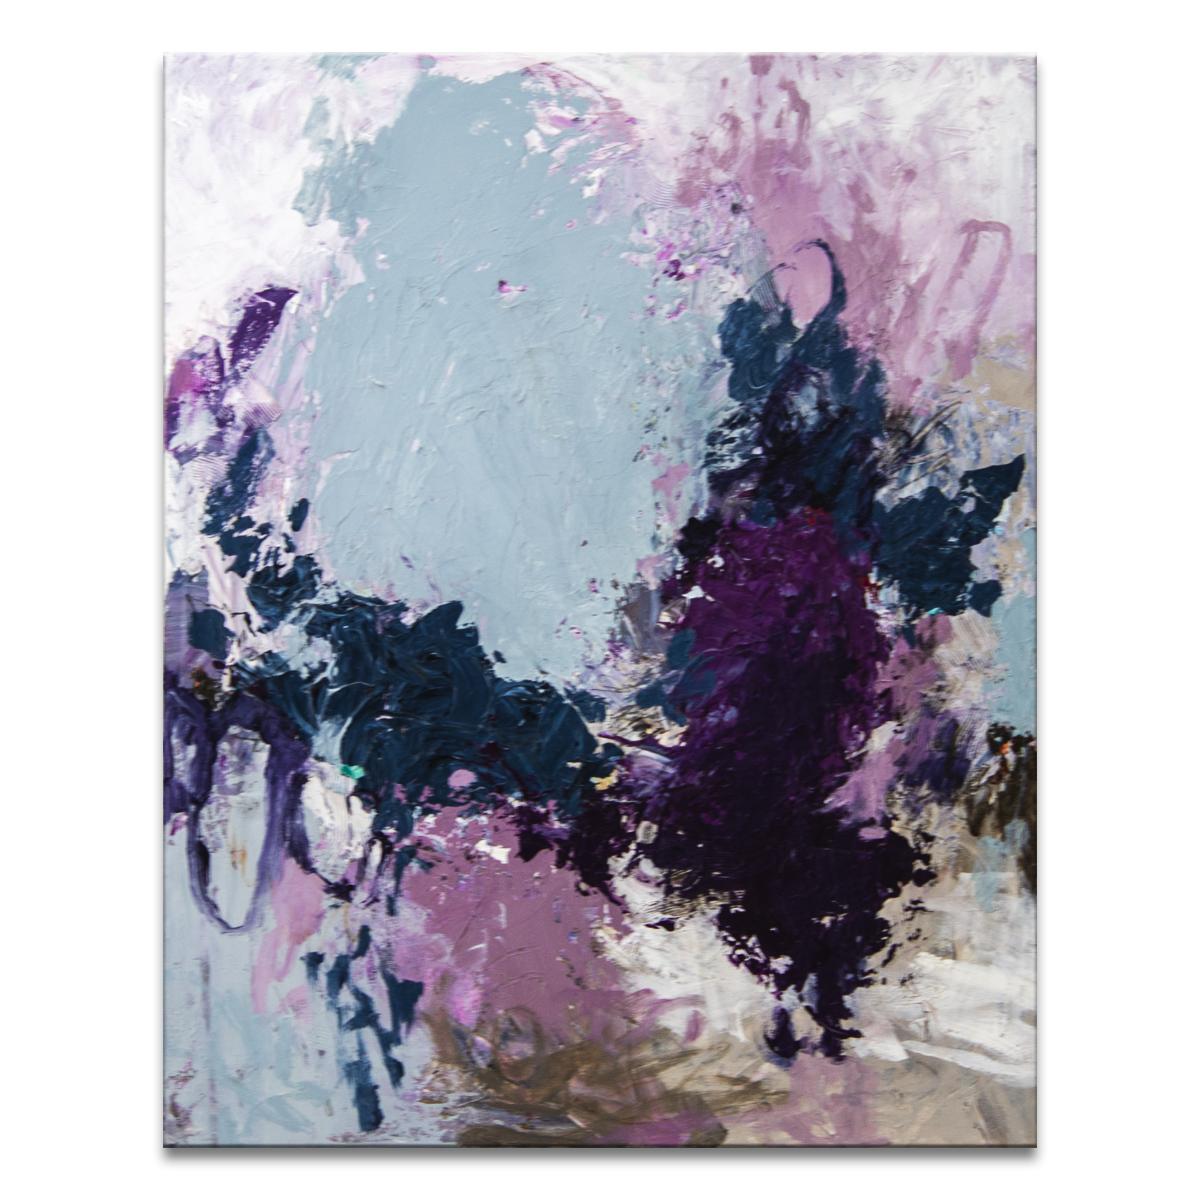 ‘Vineyard Vibe' Wrapped Canvas Original Painting features a vibrant abstract aesthetic in tones of purple, blue, gray, beige, brown, beige and white. Inspired by nature and Bible verse Samuel 1:11, Tammy Staab’s positivity and light radiates through